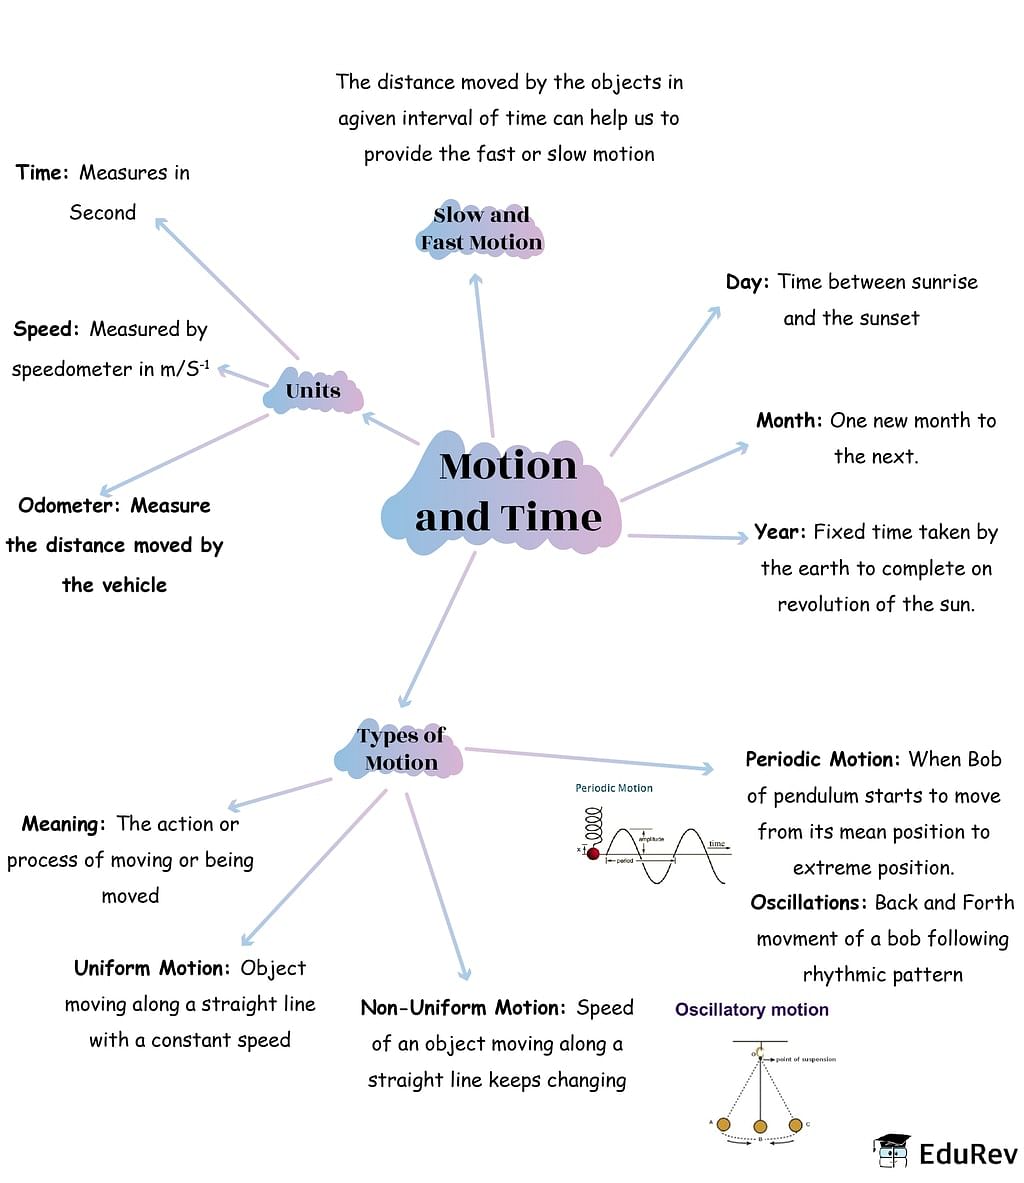 motion and time class 7 assignment pdf